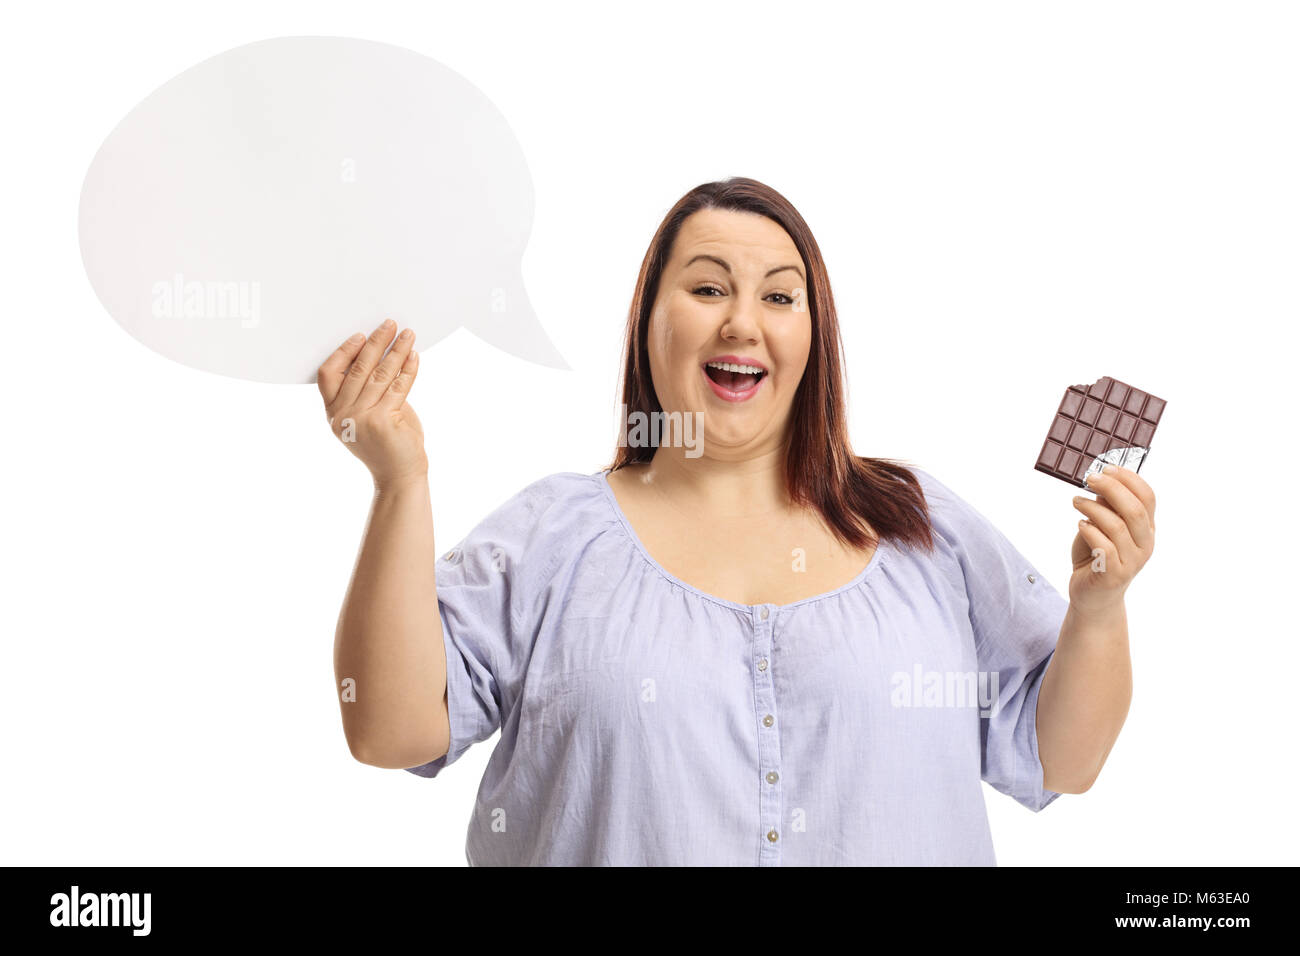 Cheerful overweight woman with a speech bubble and chocolate isolated on white background Stock Photo